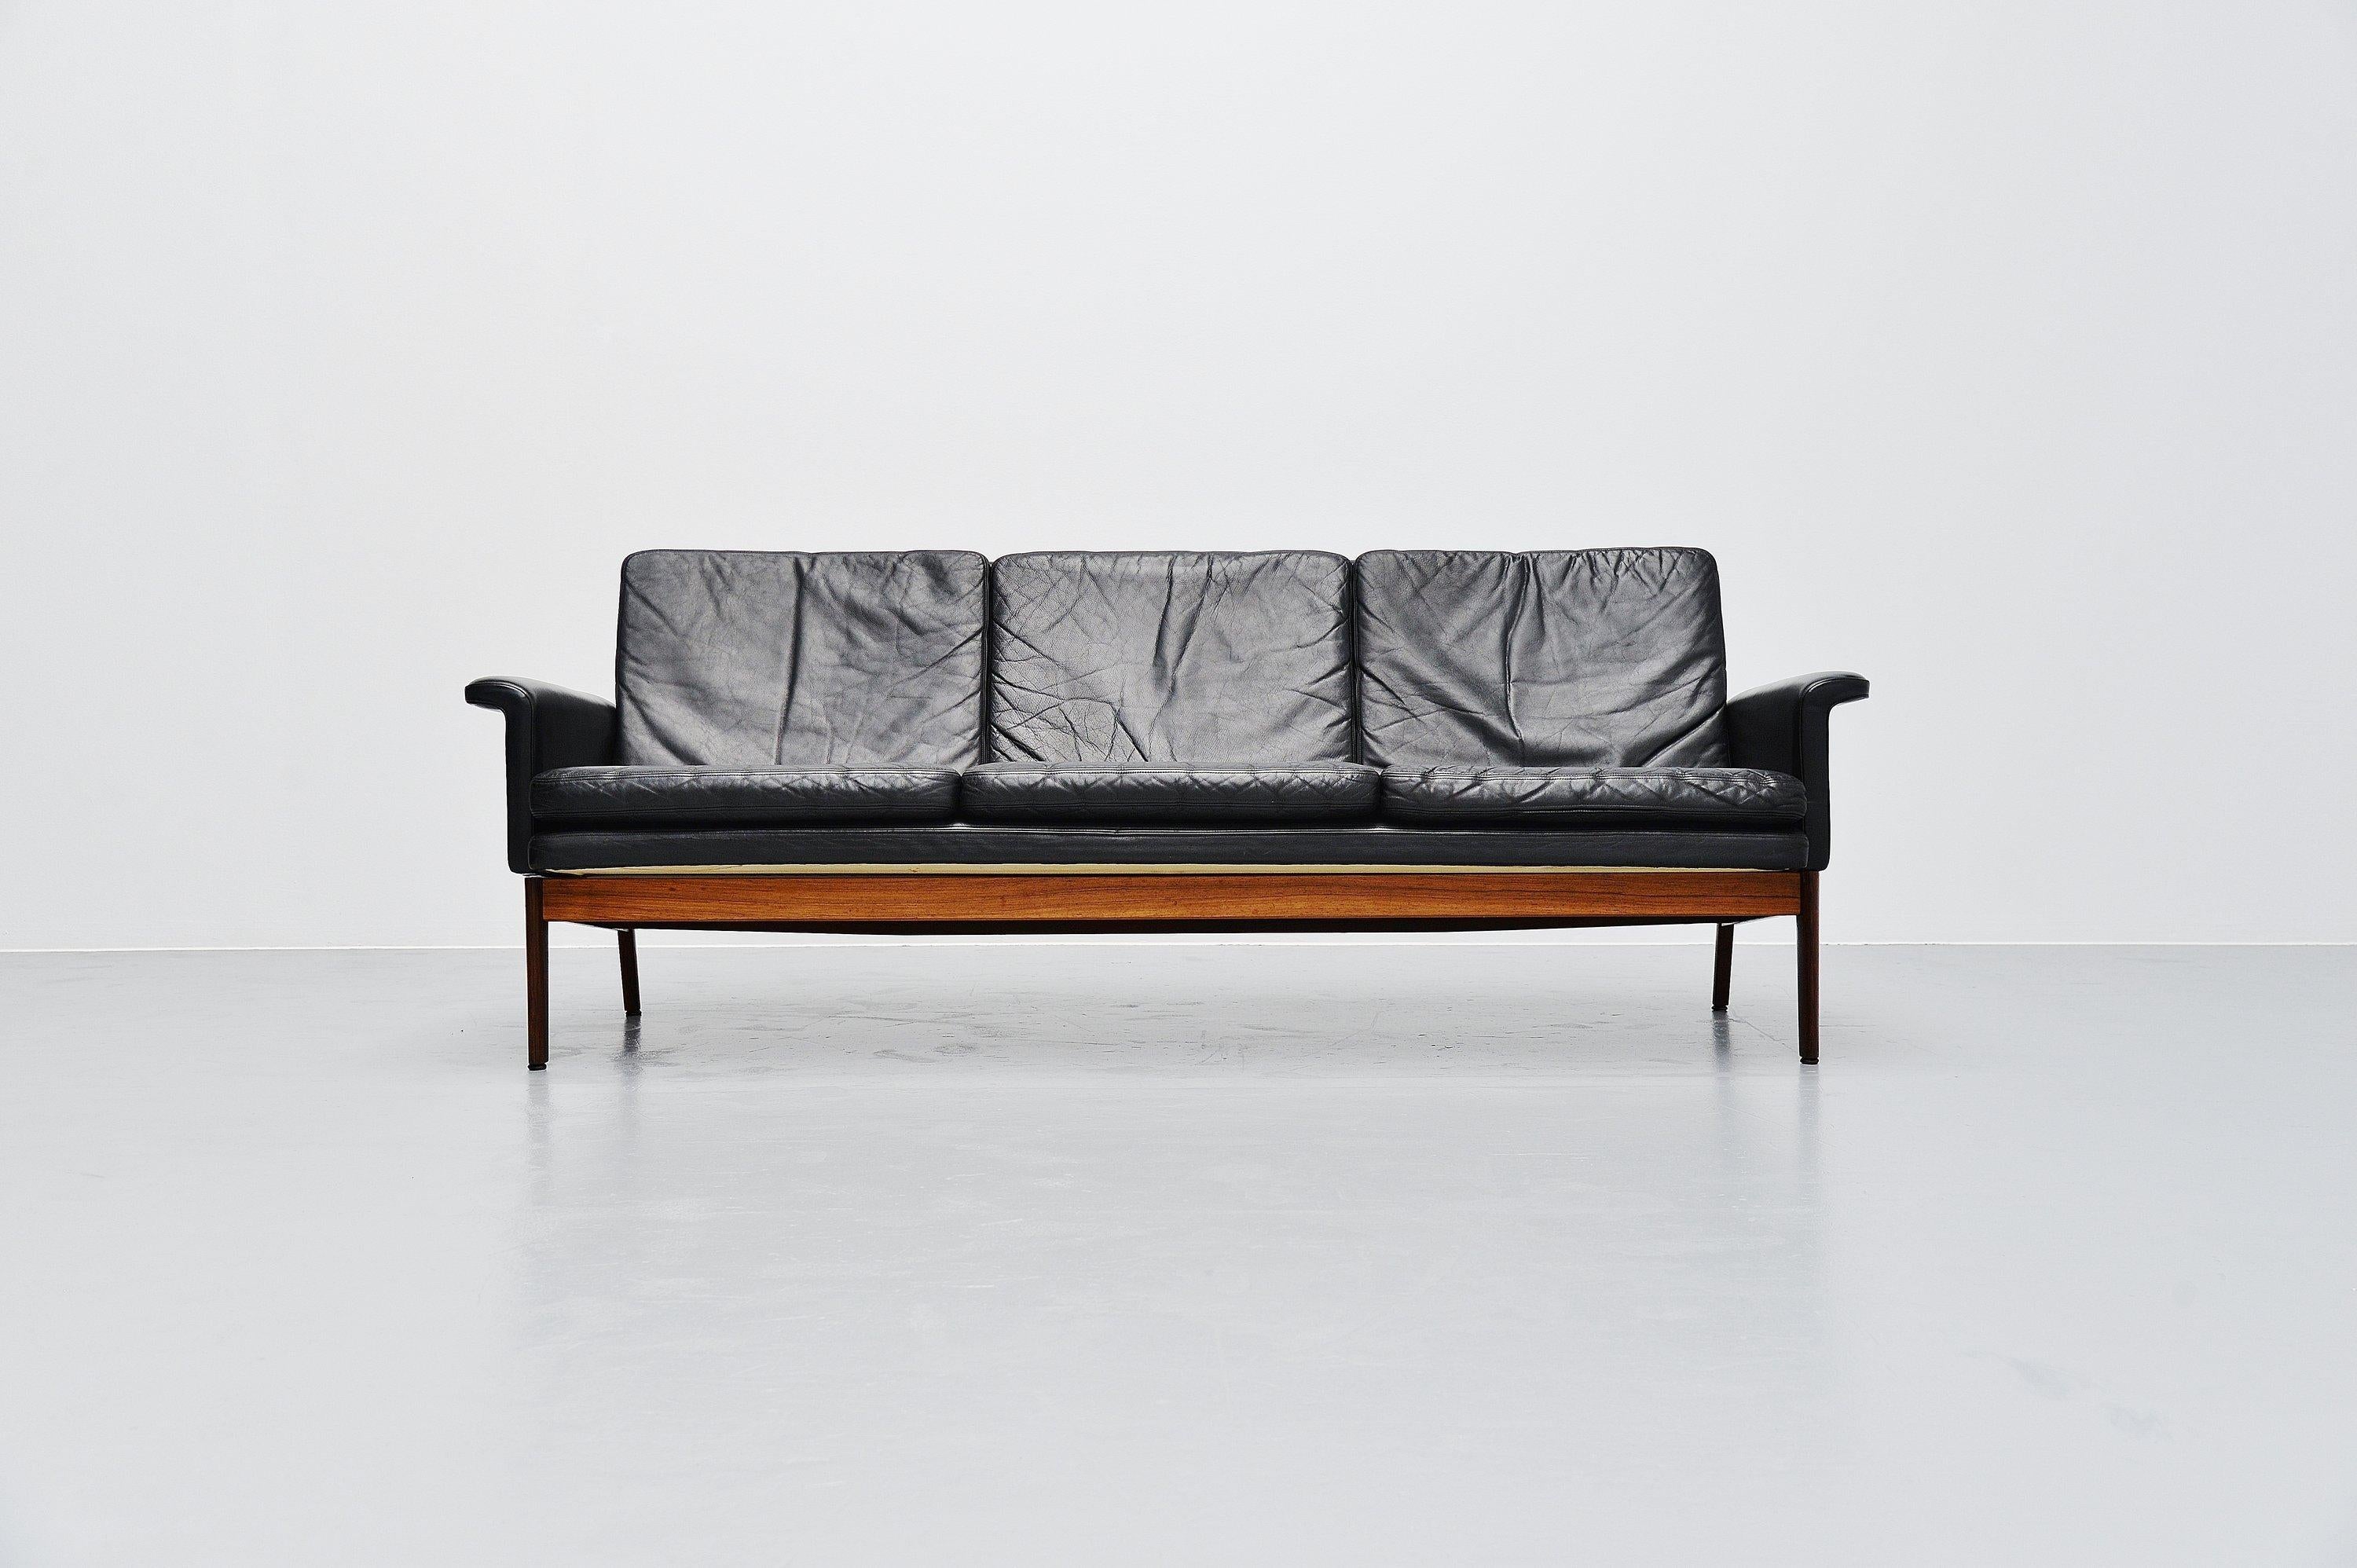 Danish modern so called Jupiter sofa model 218 designed by Finn Juhl and manufactured by France and Son, Denmark 1965. The sofa has a solid rosewood frame and black leather seating. The sofa is in fully original and very good condition. No tears or